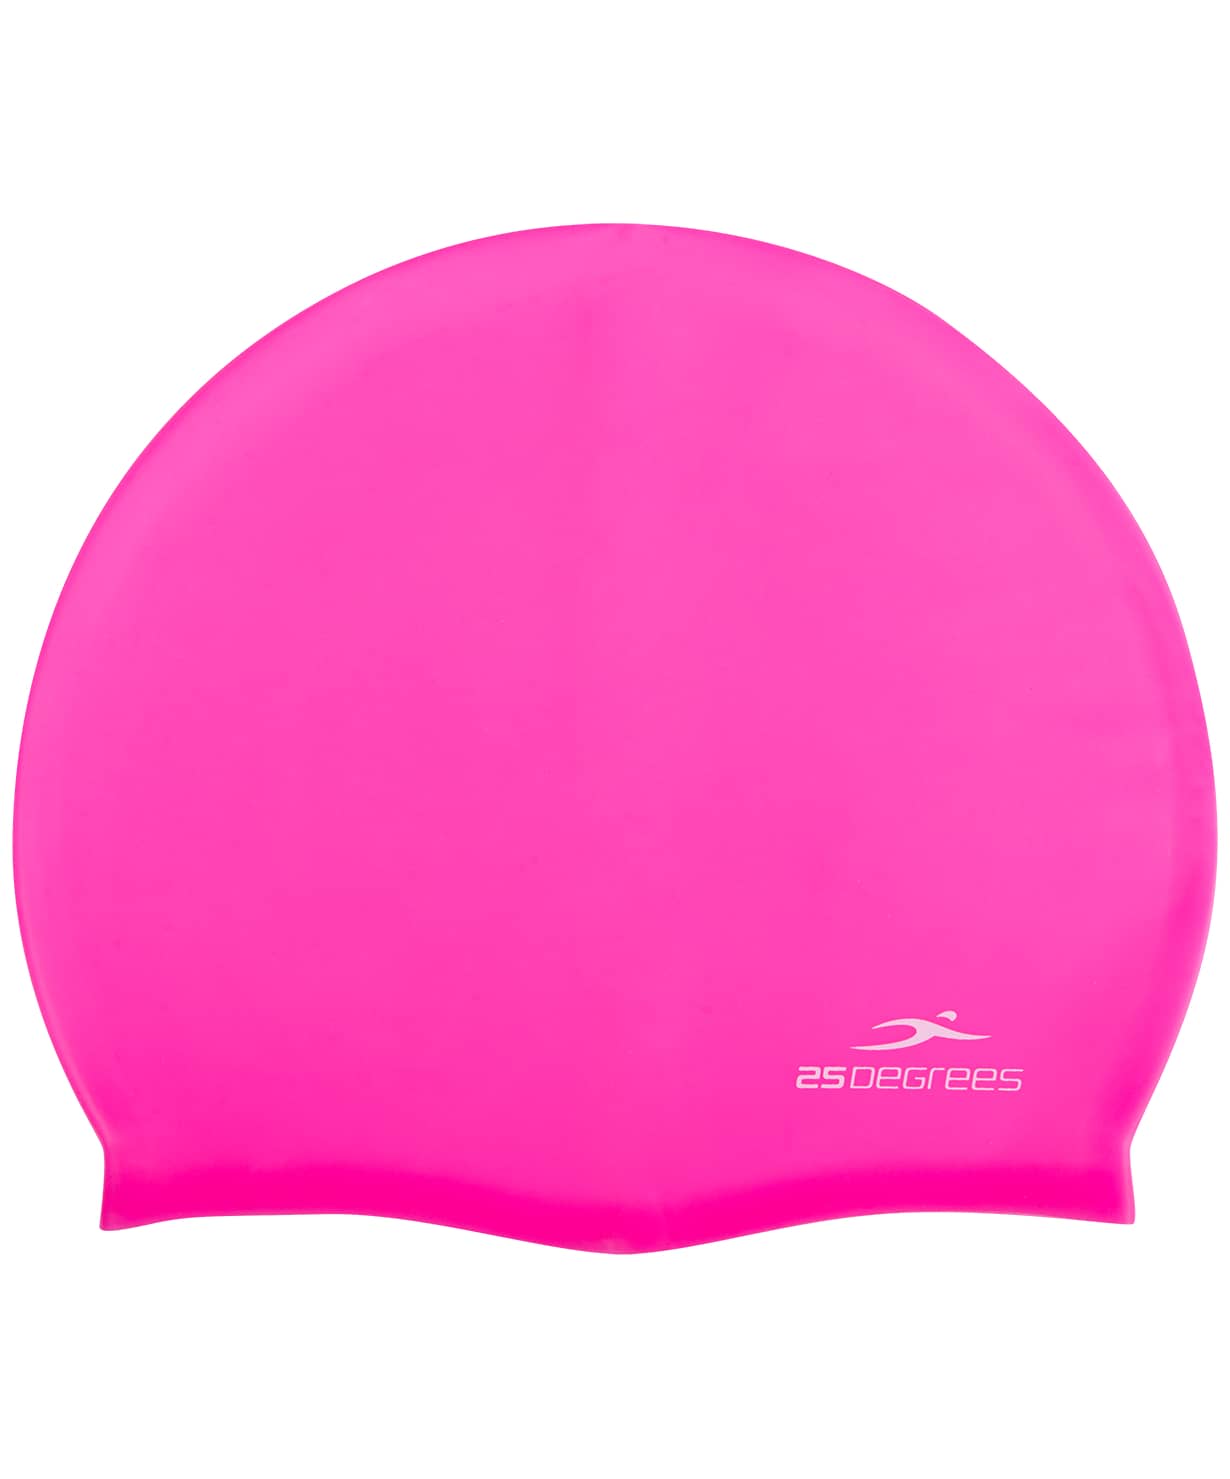    25DEGREES Nuance Pink, , 